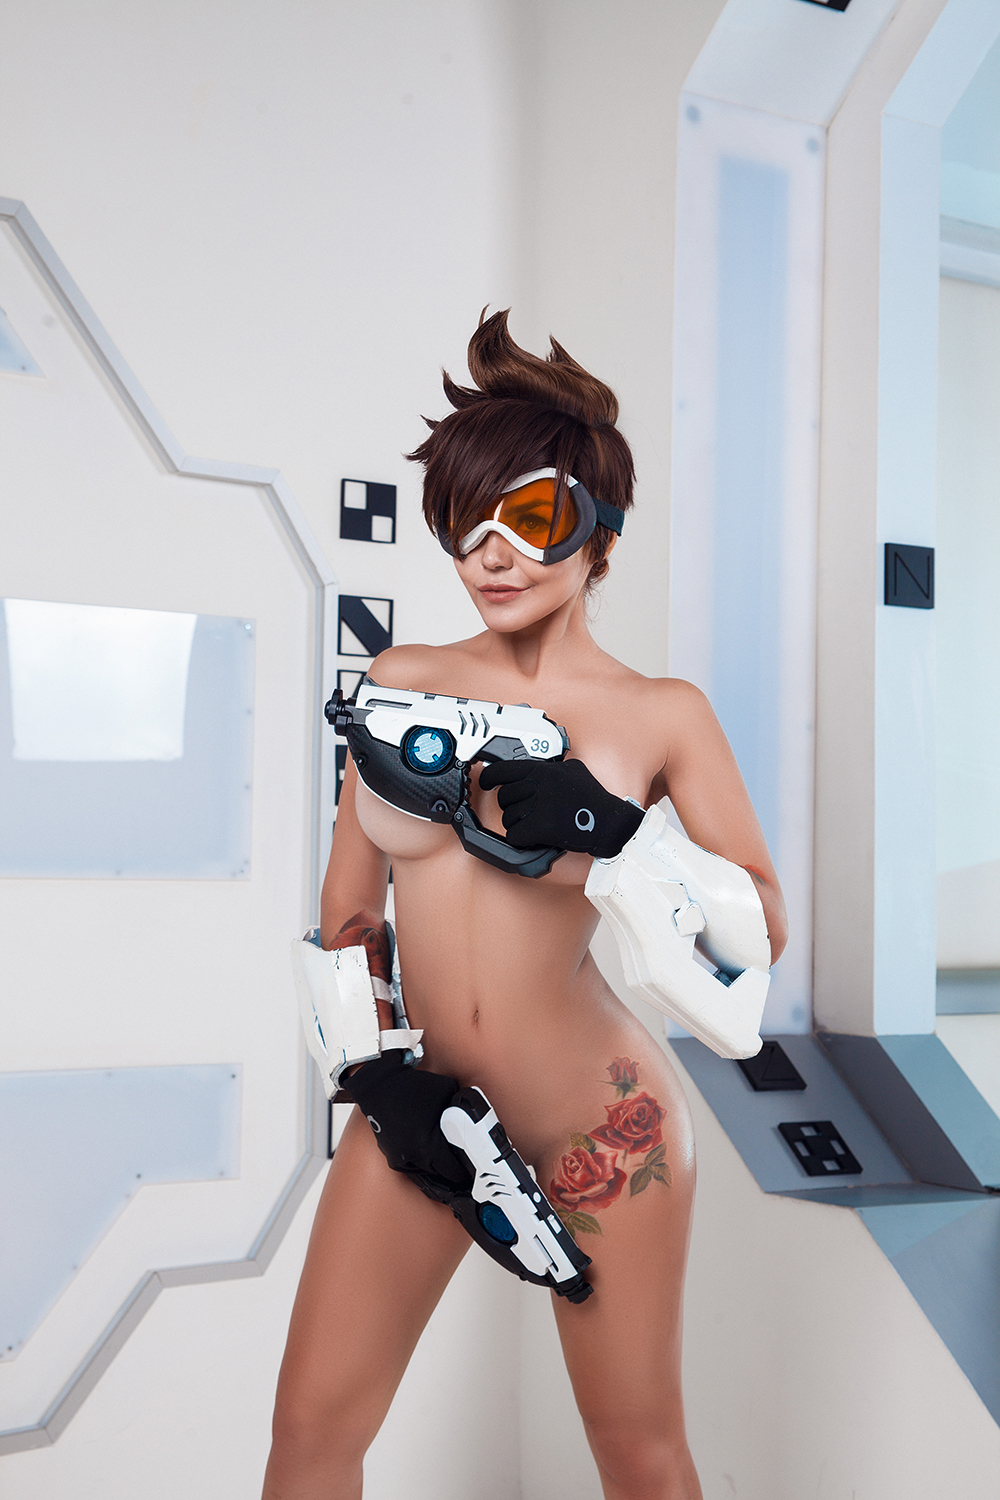 Lewd Gamer Girls Cosplay Collection - Tracer Cosplay By Kalinka Fox 